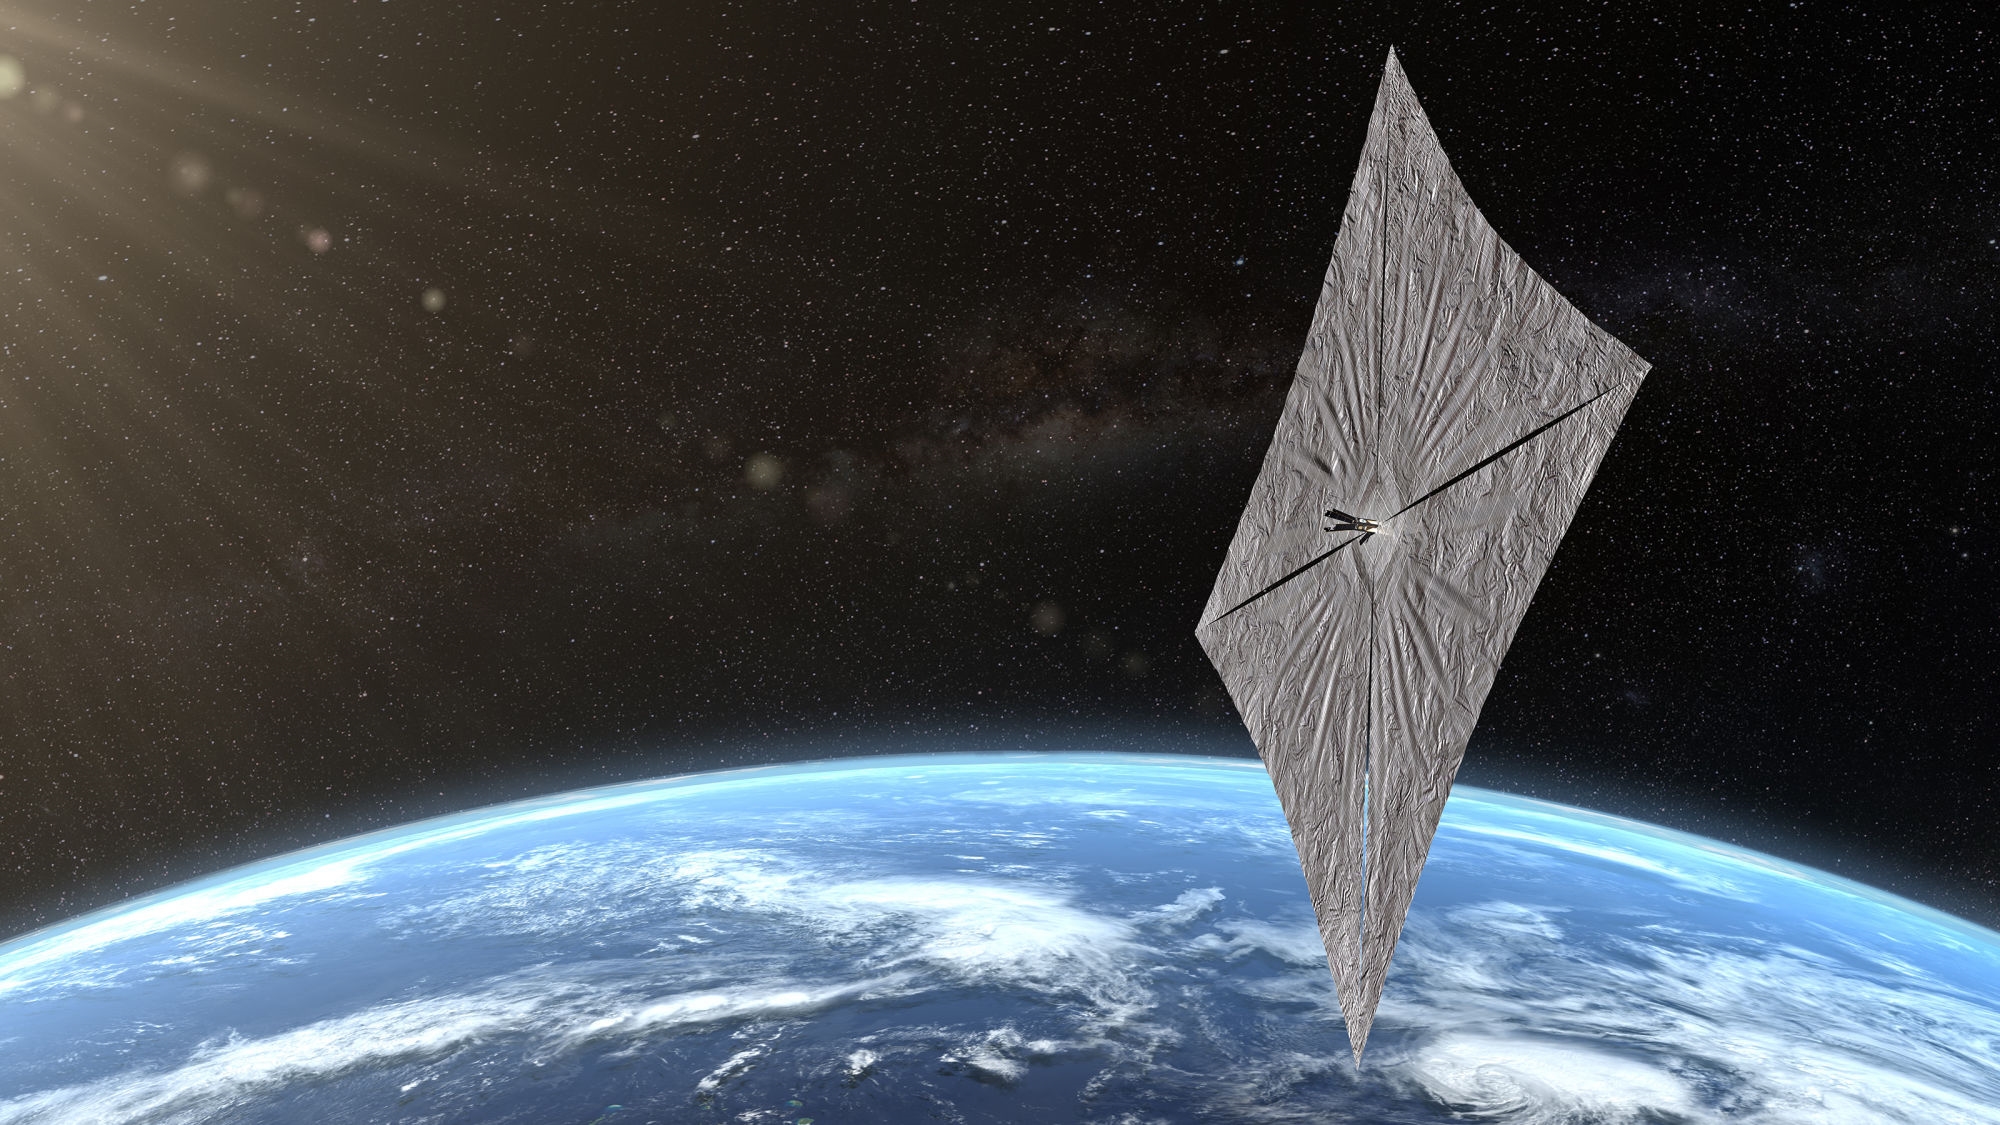 LightSail 2 sends its first signals back to Earth | DeviceDaily.com